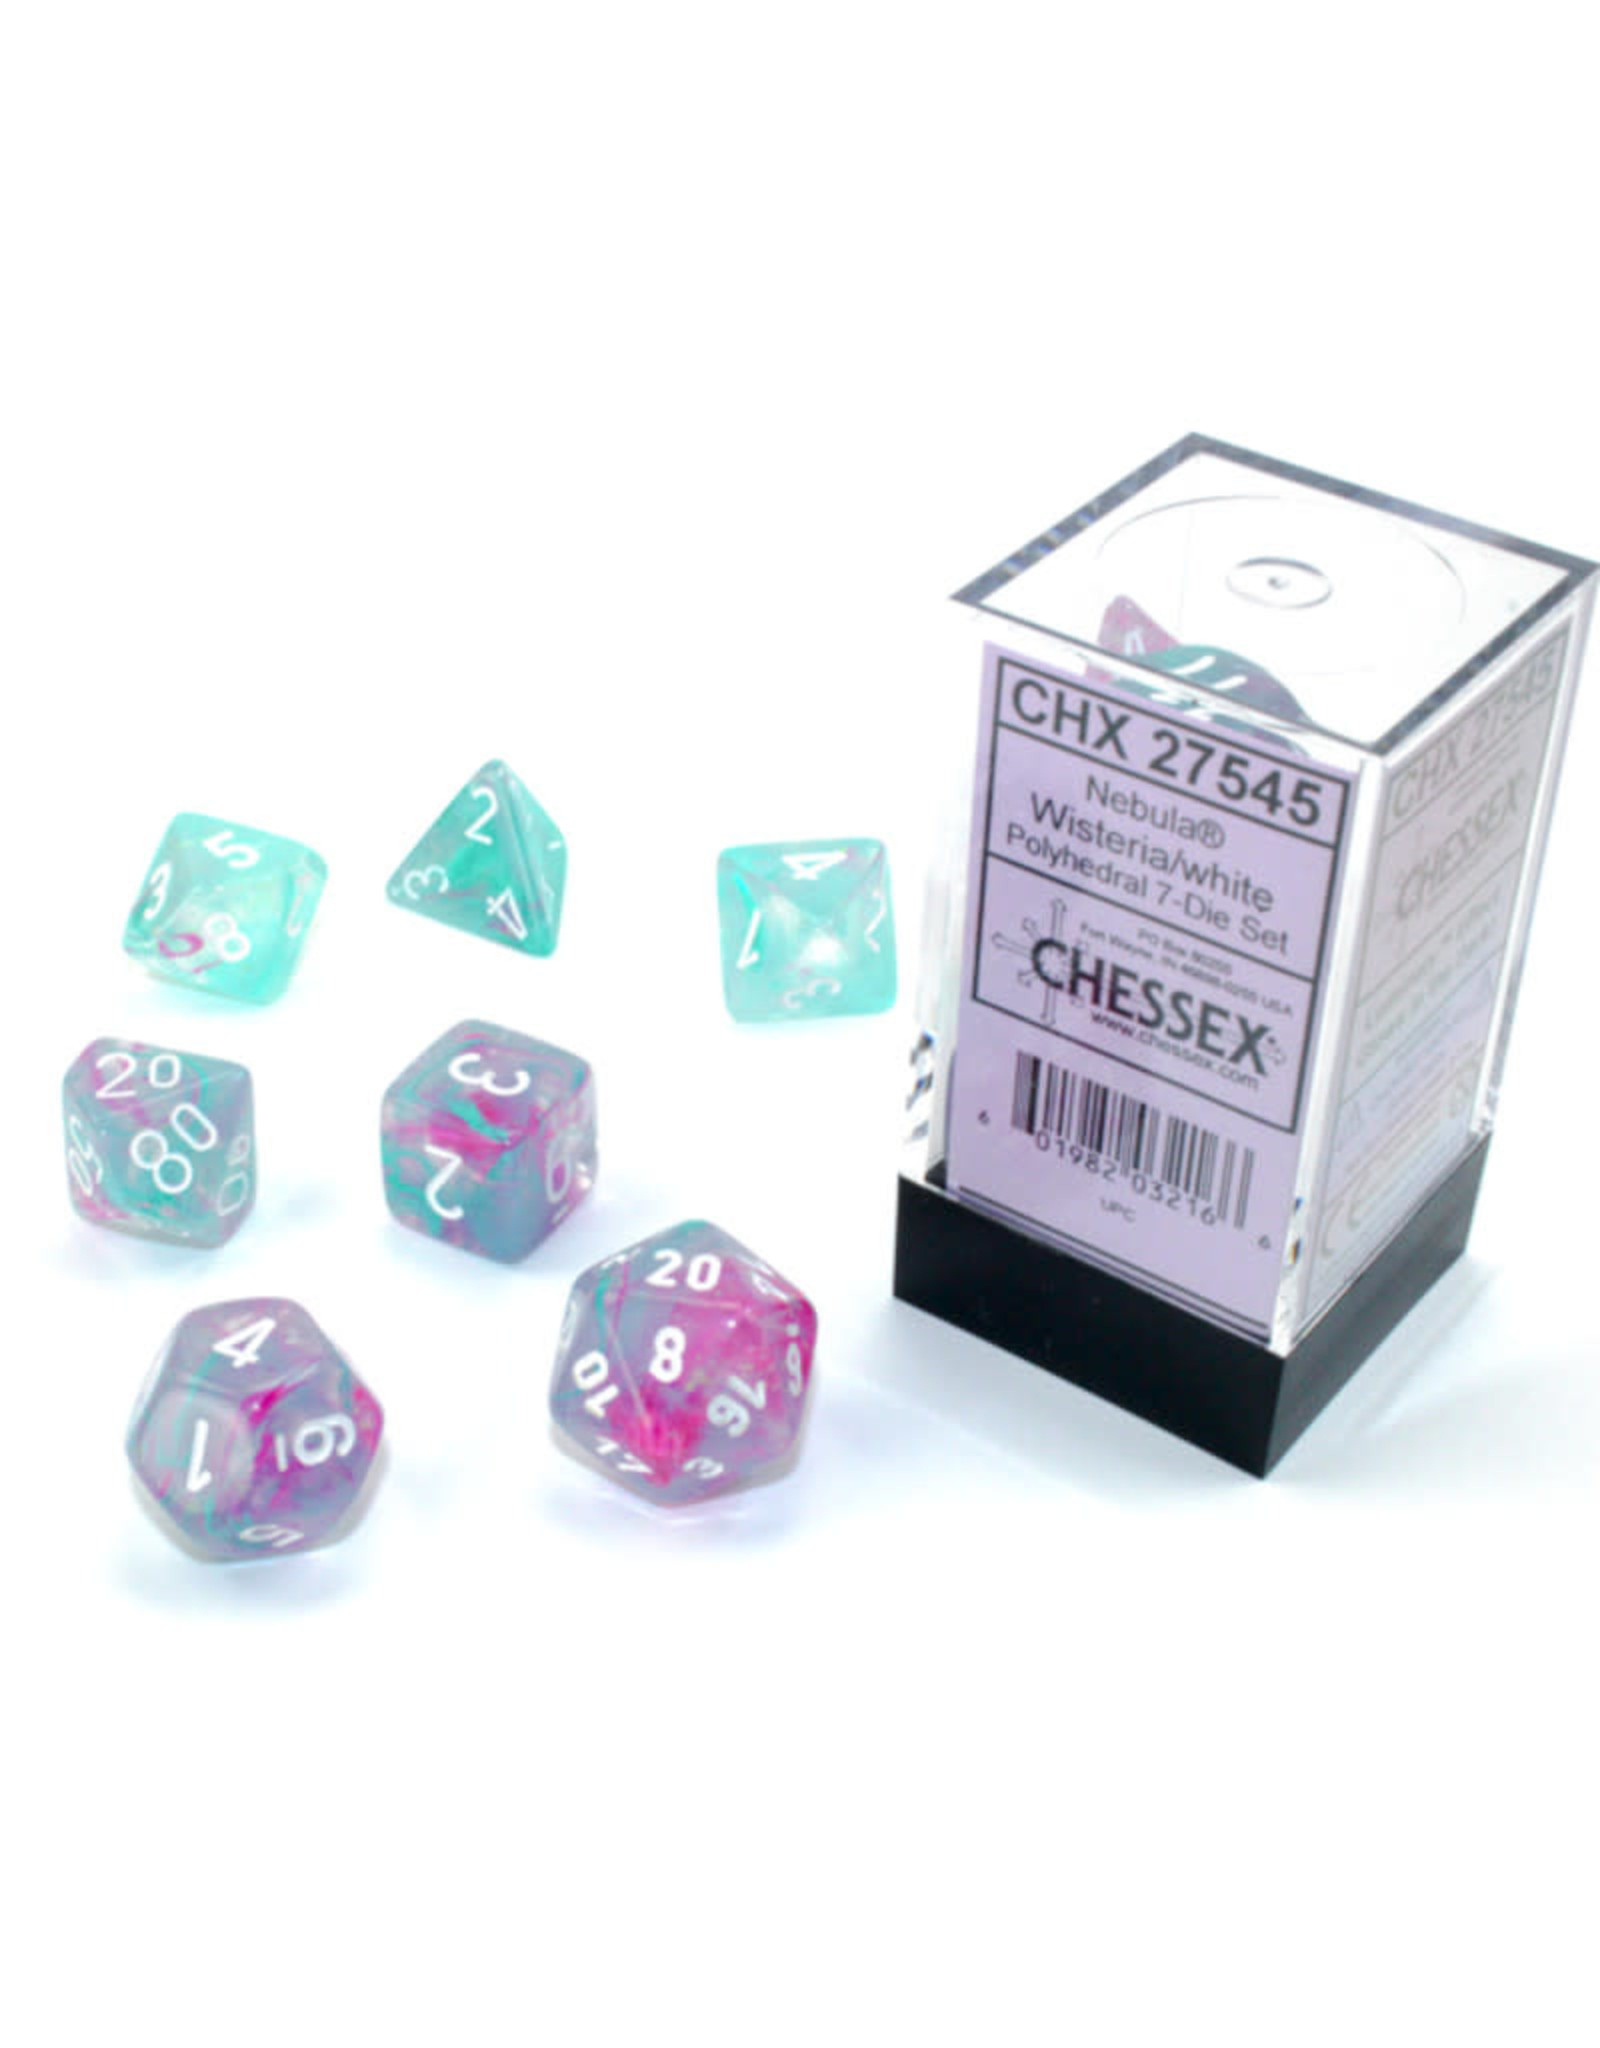 Chessex Polyhedral Dice Set: Luminary Westeria/White (7)